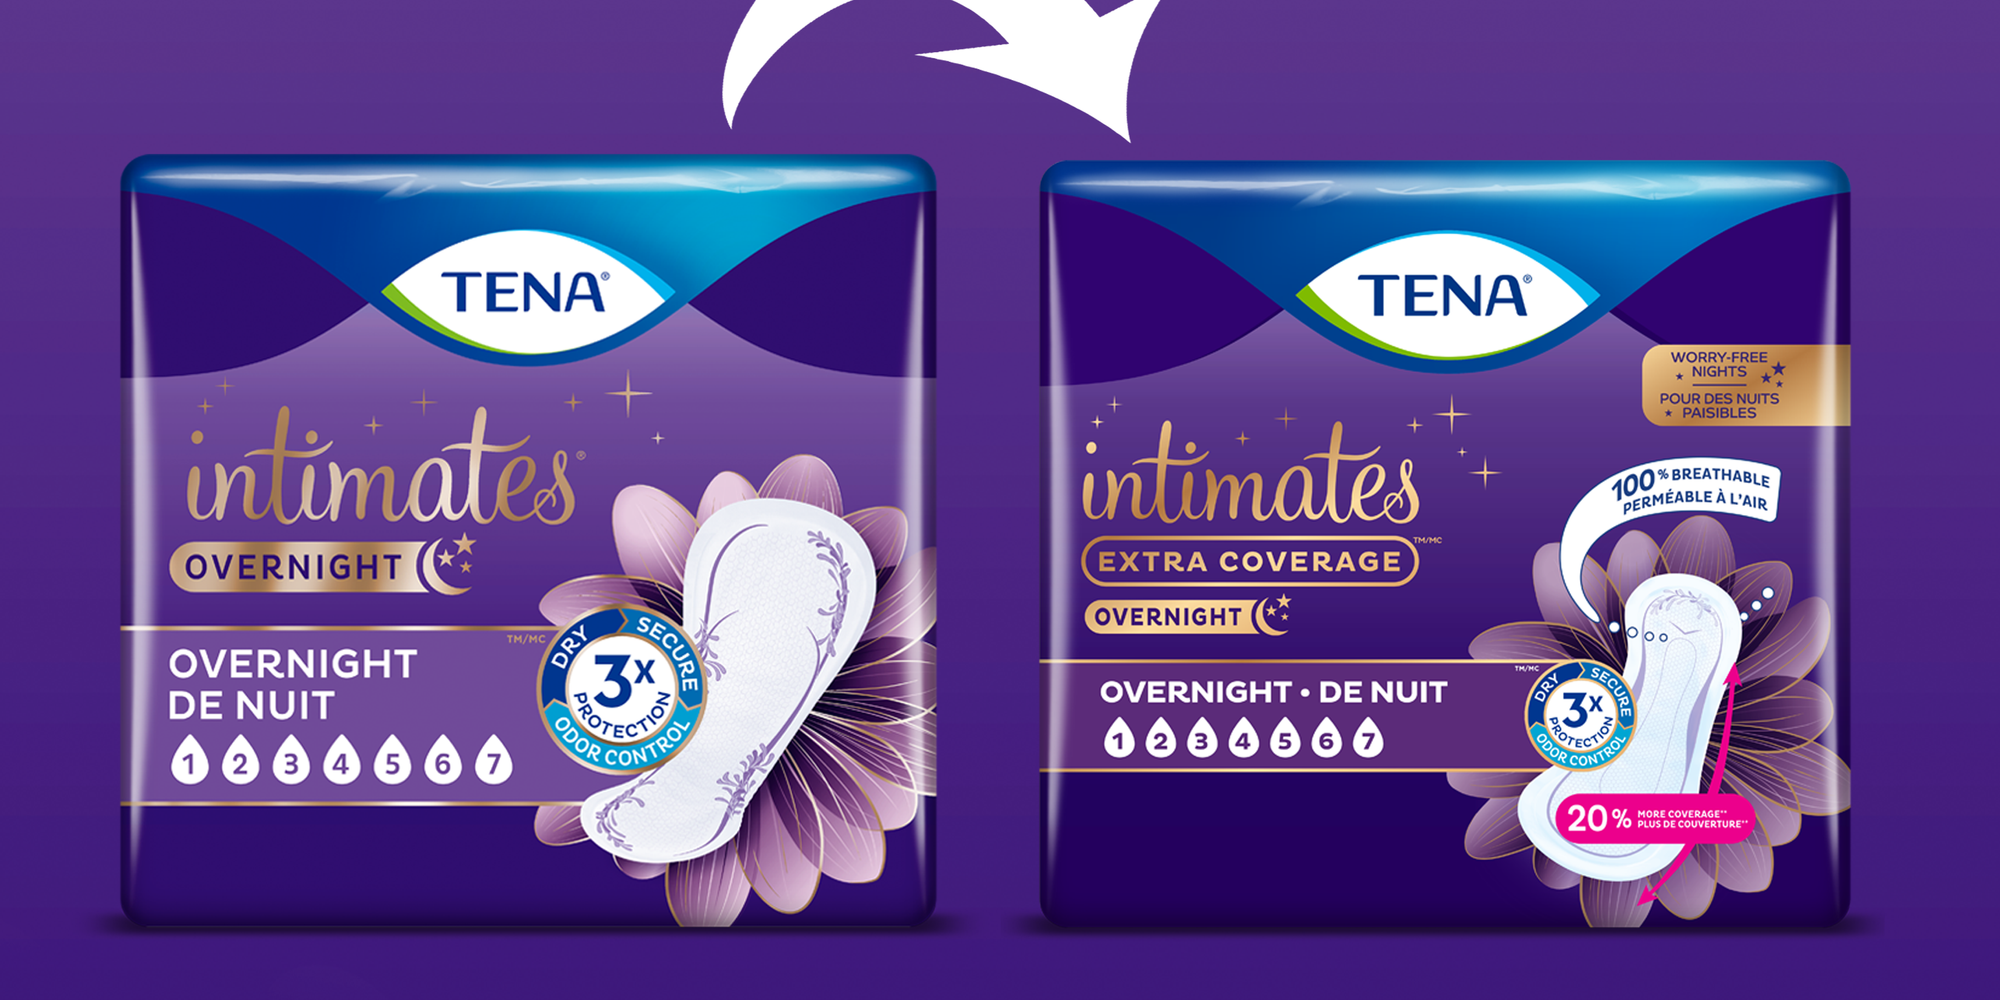 Cover Image for Tena Intimates Overnight Pads Update